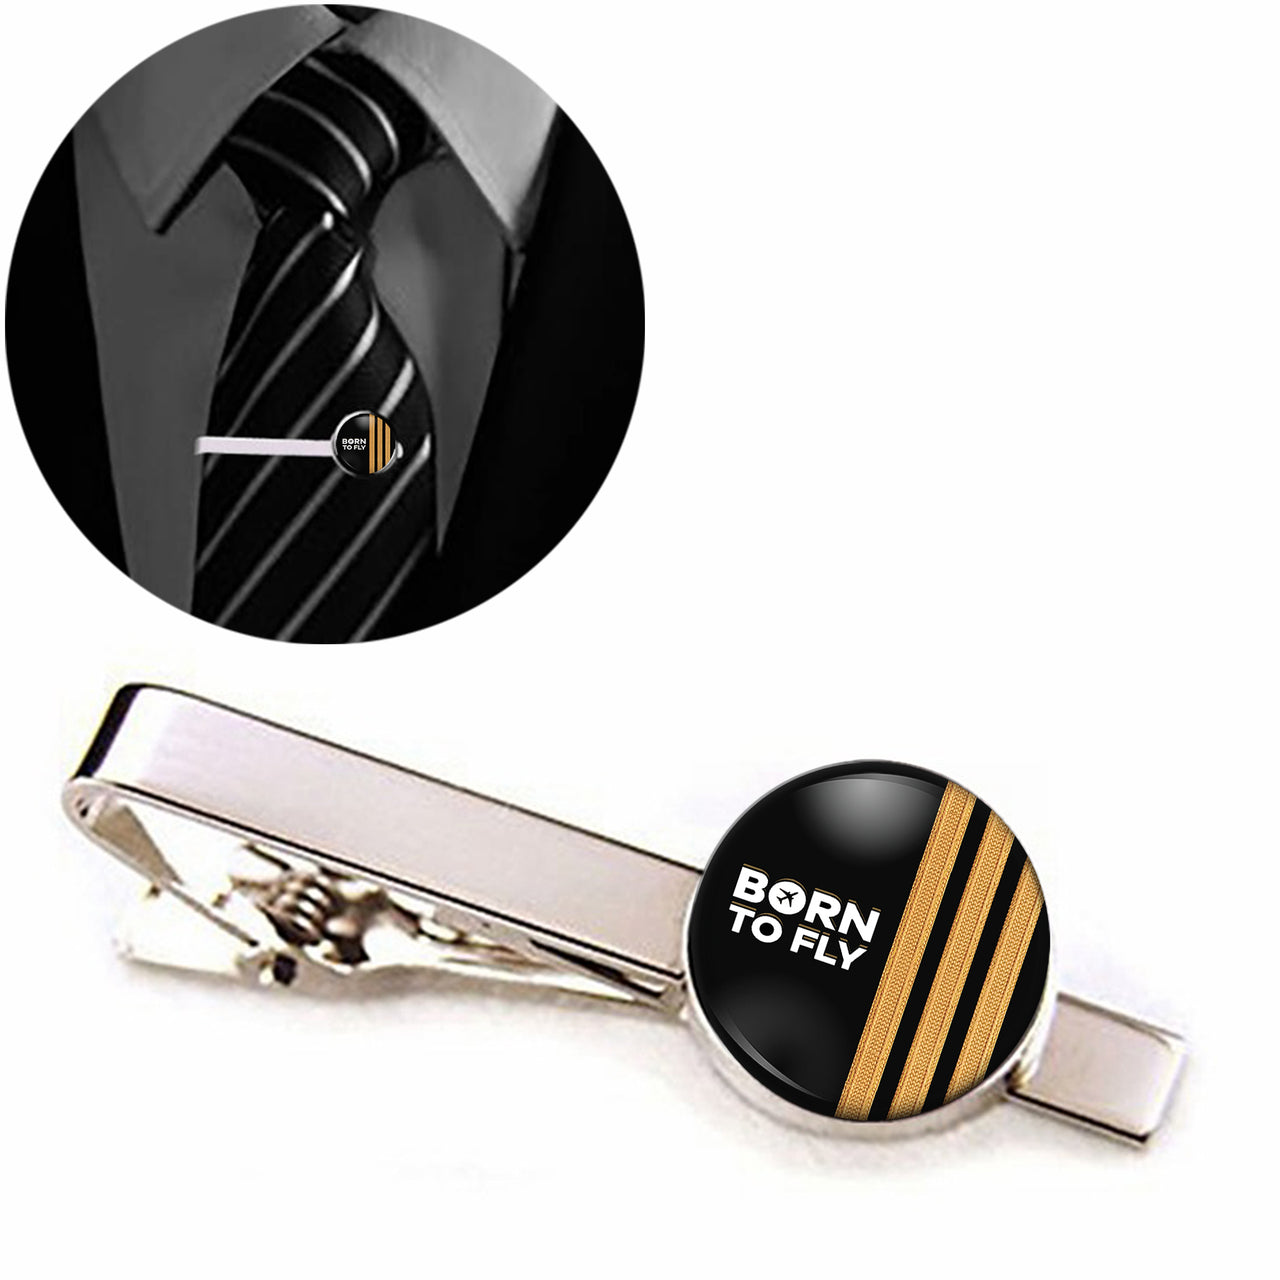 Born To Fly & Pilot Epaulettes (3 Lines) Designed Tie Clips